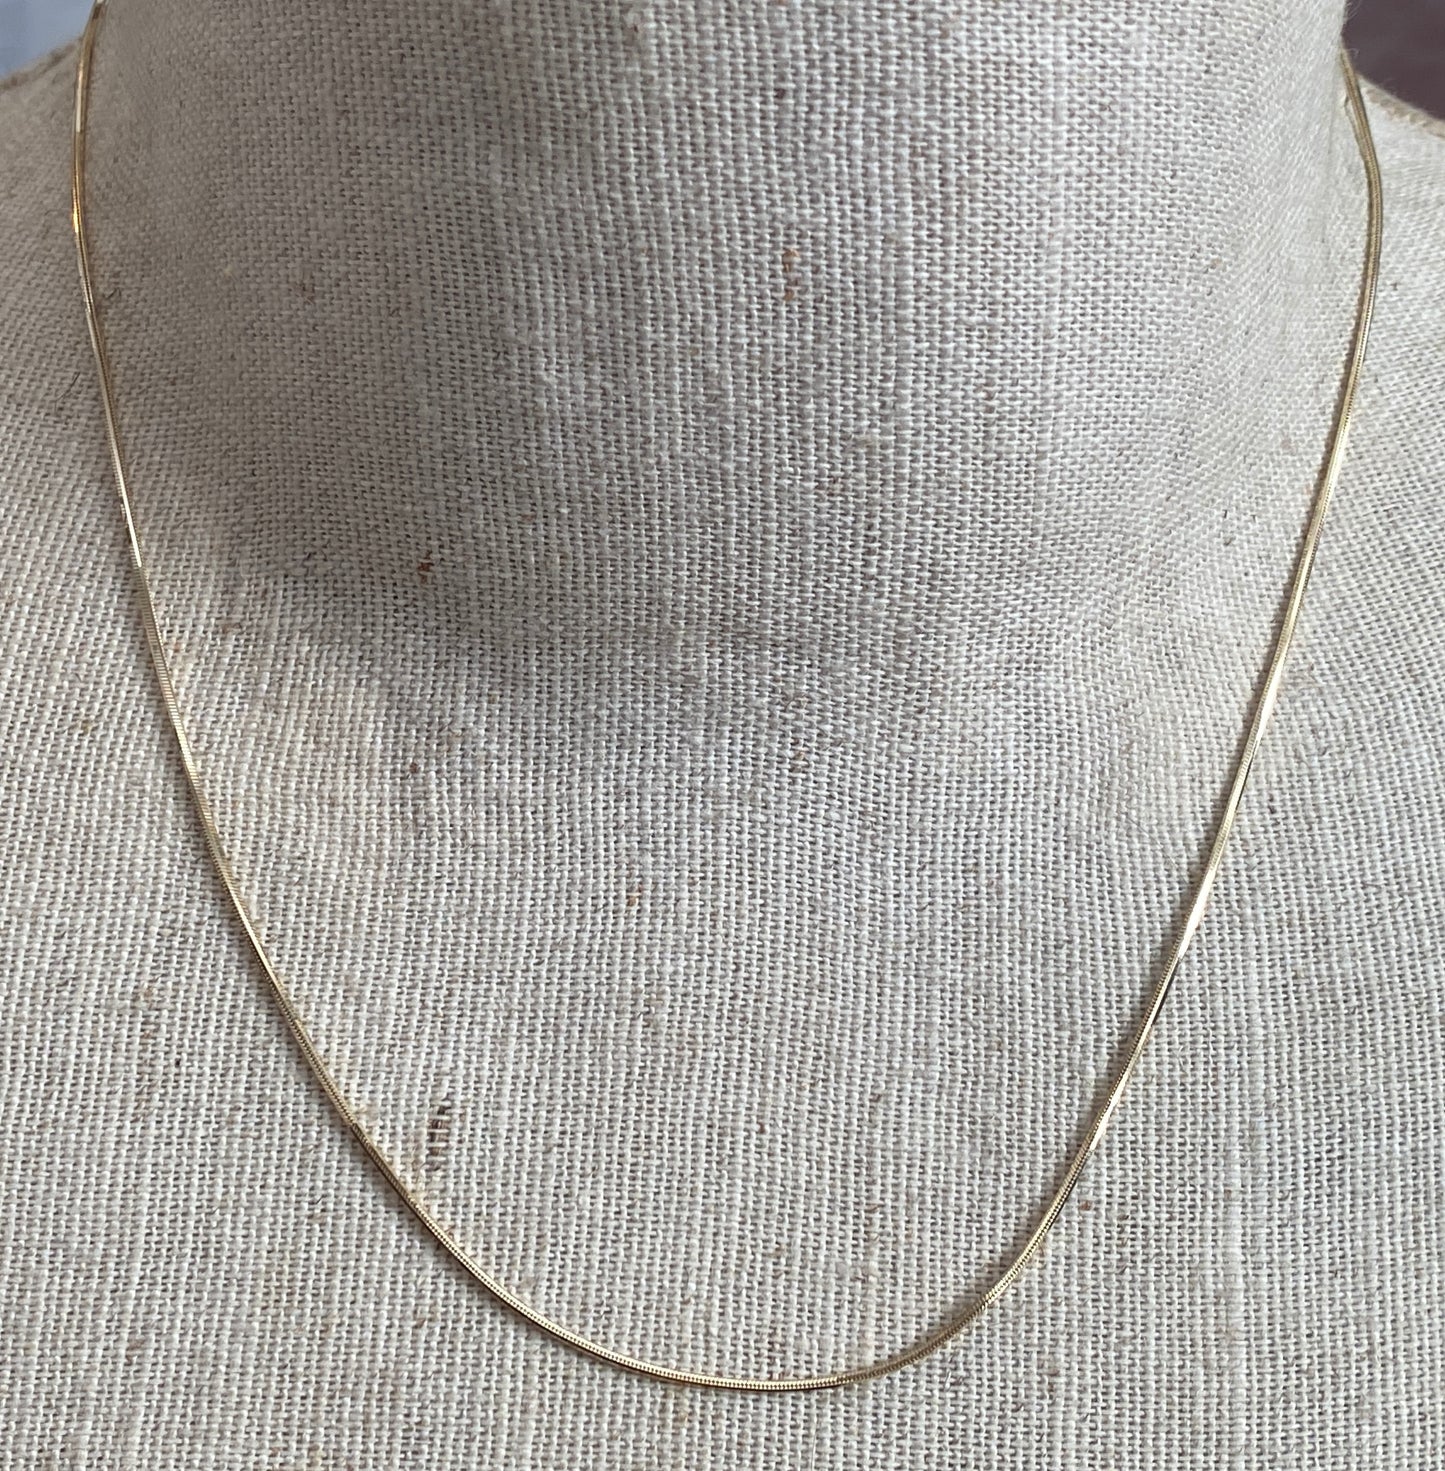 14k Yellow Gold Box Chain Necklace 18" x 1mm Signed Aurafin